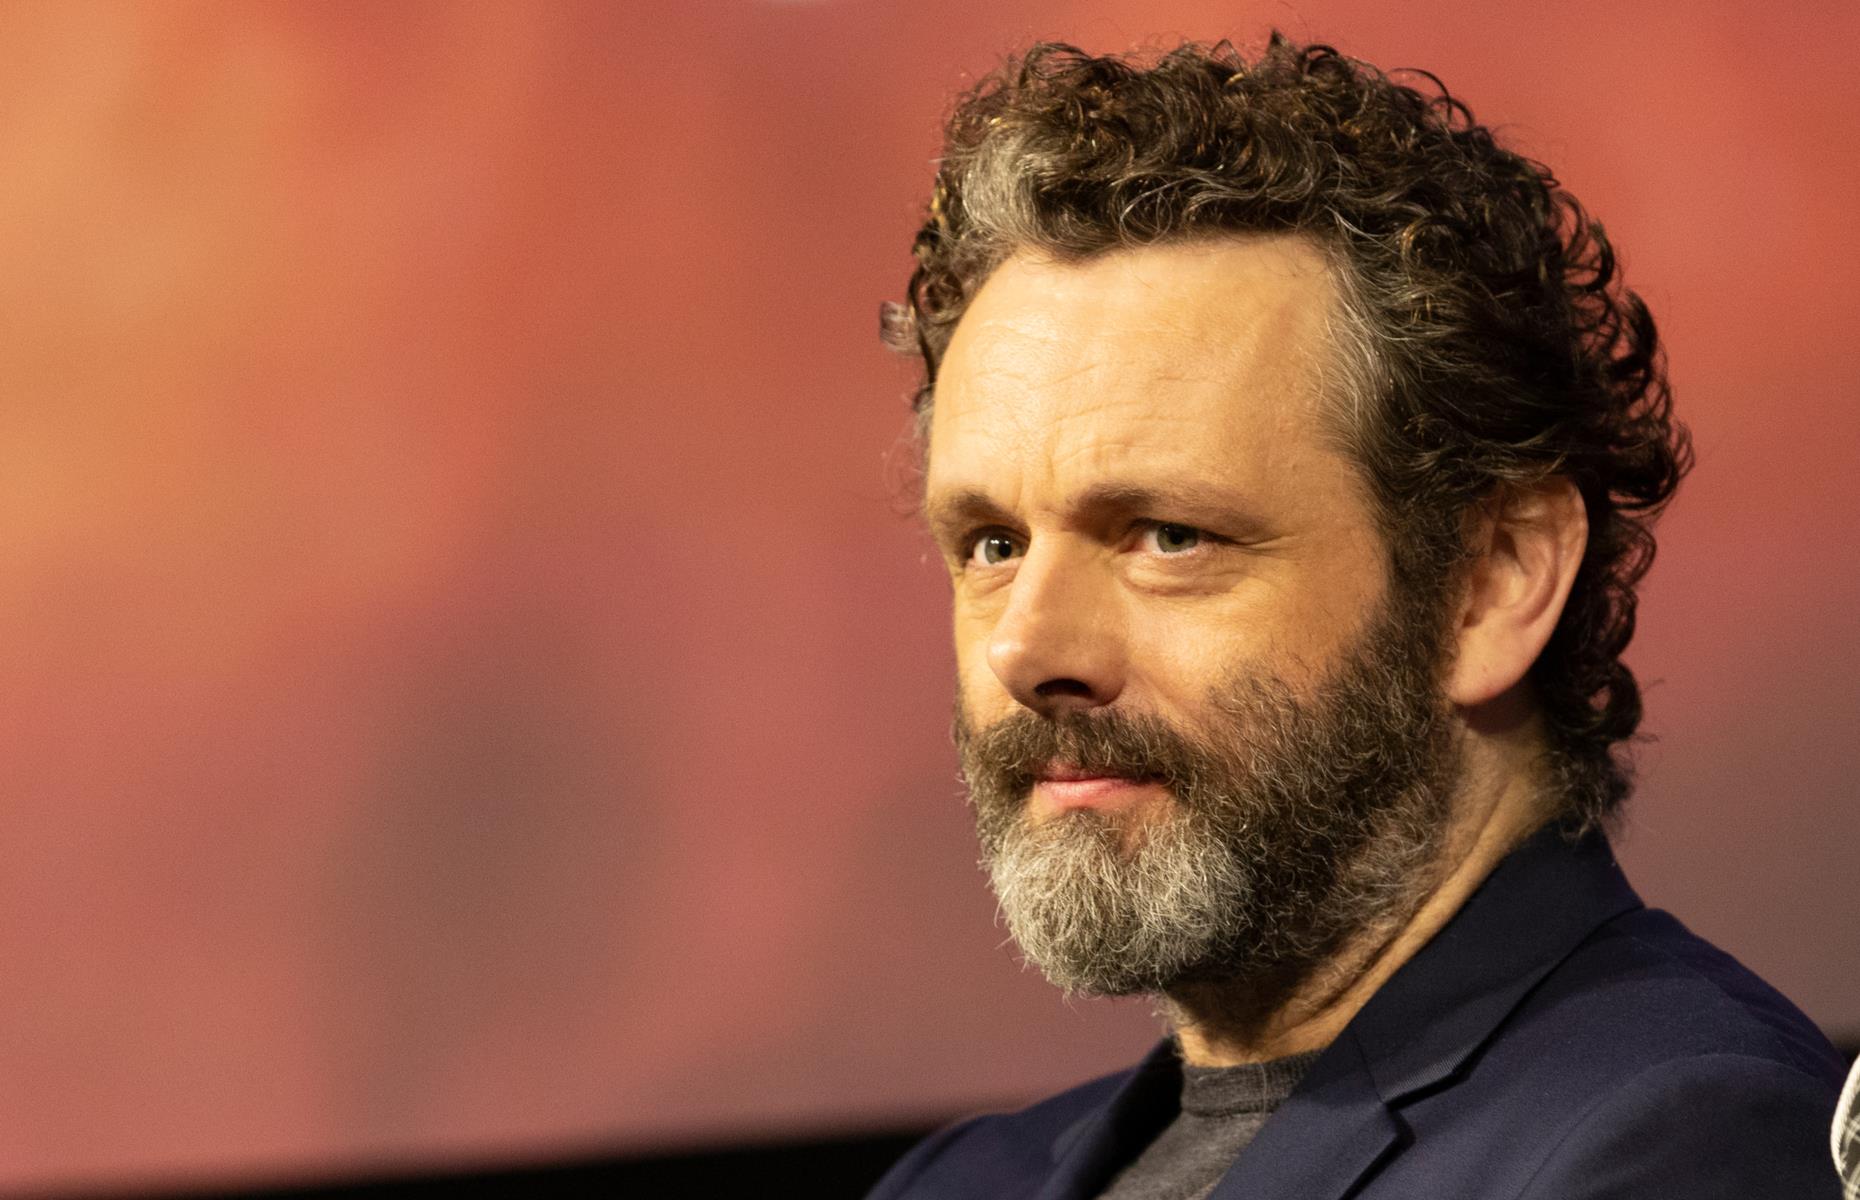 Michael Sheen donates the bulk of his salary to charity